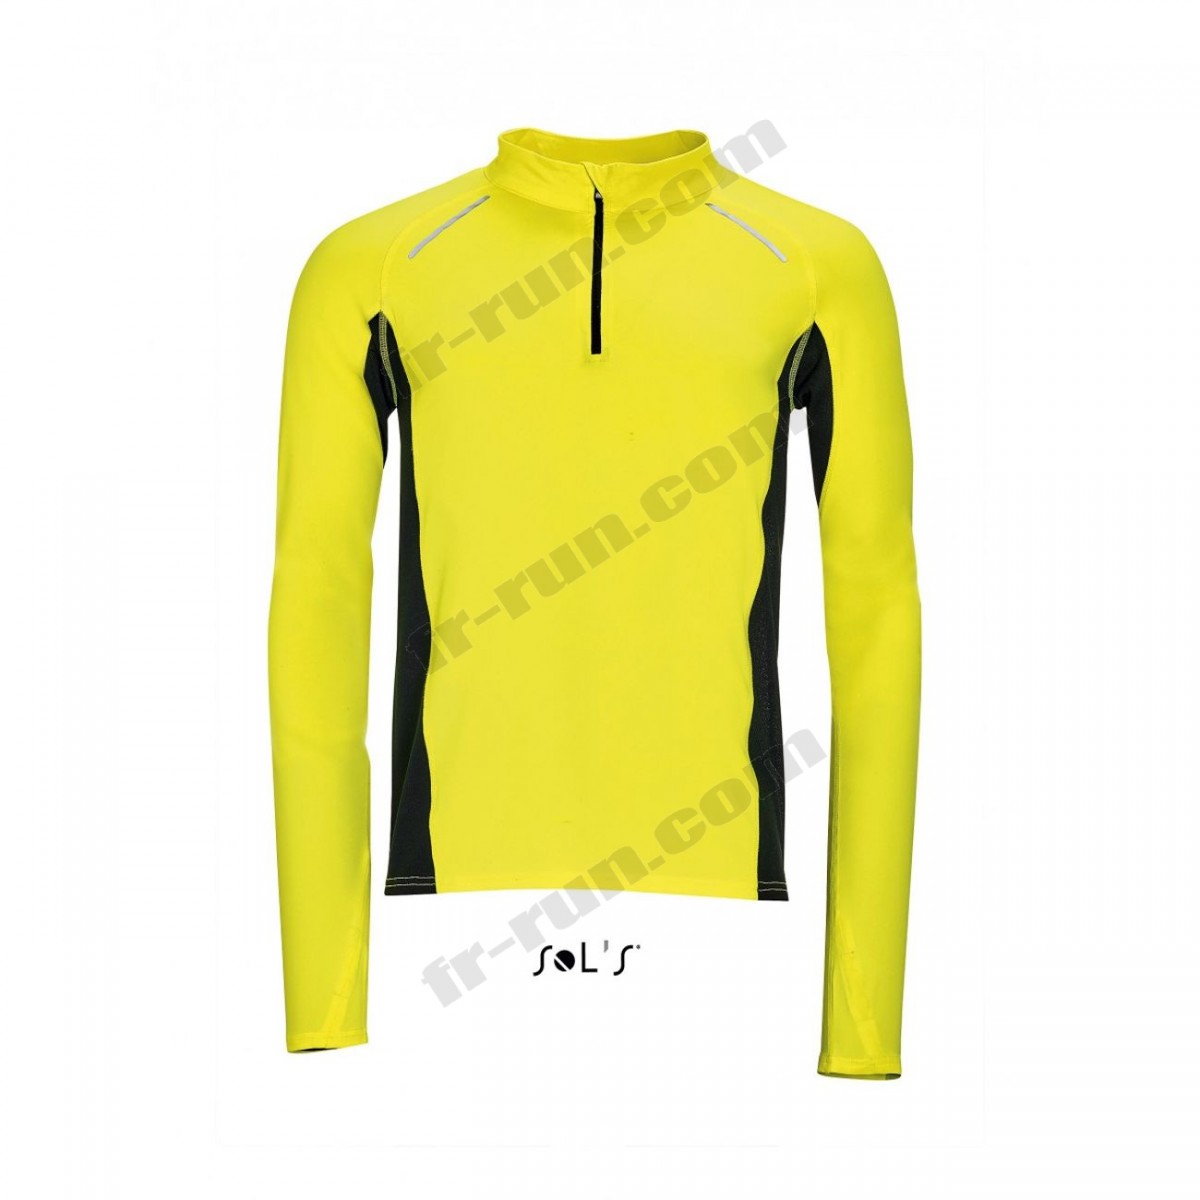 Sol S/running adulte SOL S t-shirt running manches longues - Homme - 01416 - jaune fluo √ Nouveau style √ Soldes - Sol S/running adulte SOL S t-shirt running manches longues - Homme - 01416 - jaune fluo √ Nouveau style √ Soldes